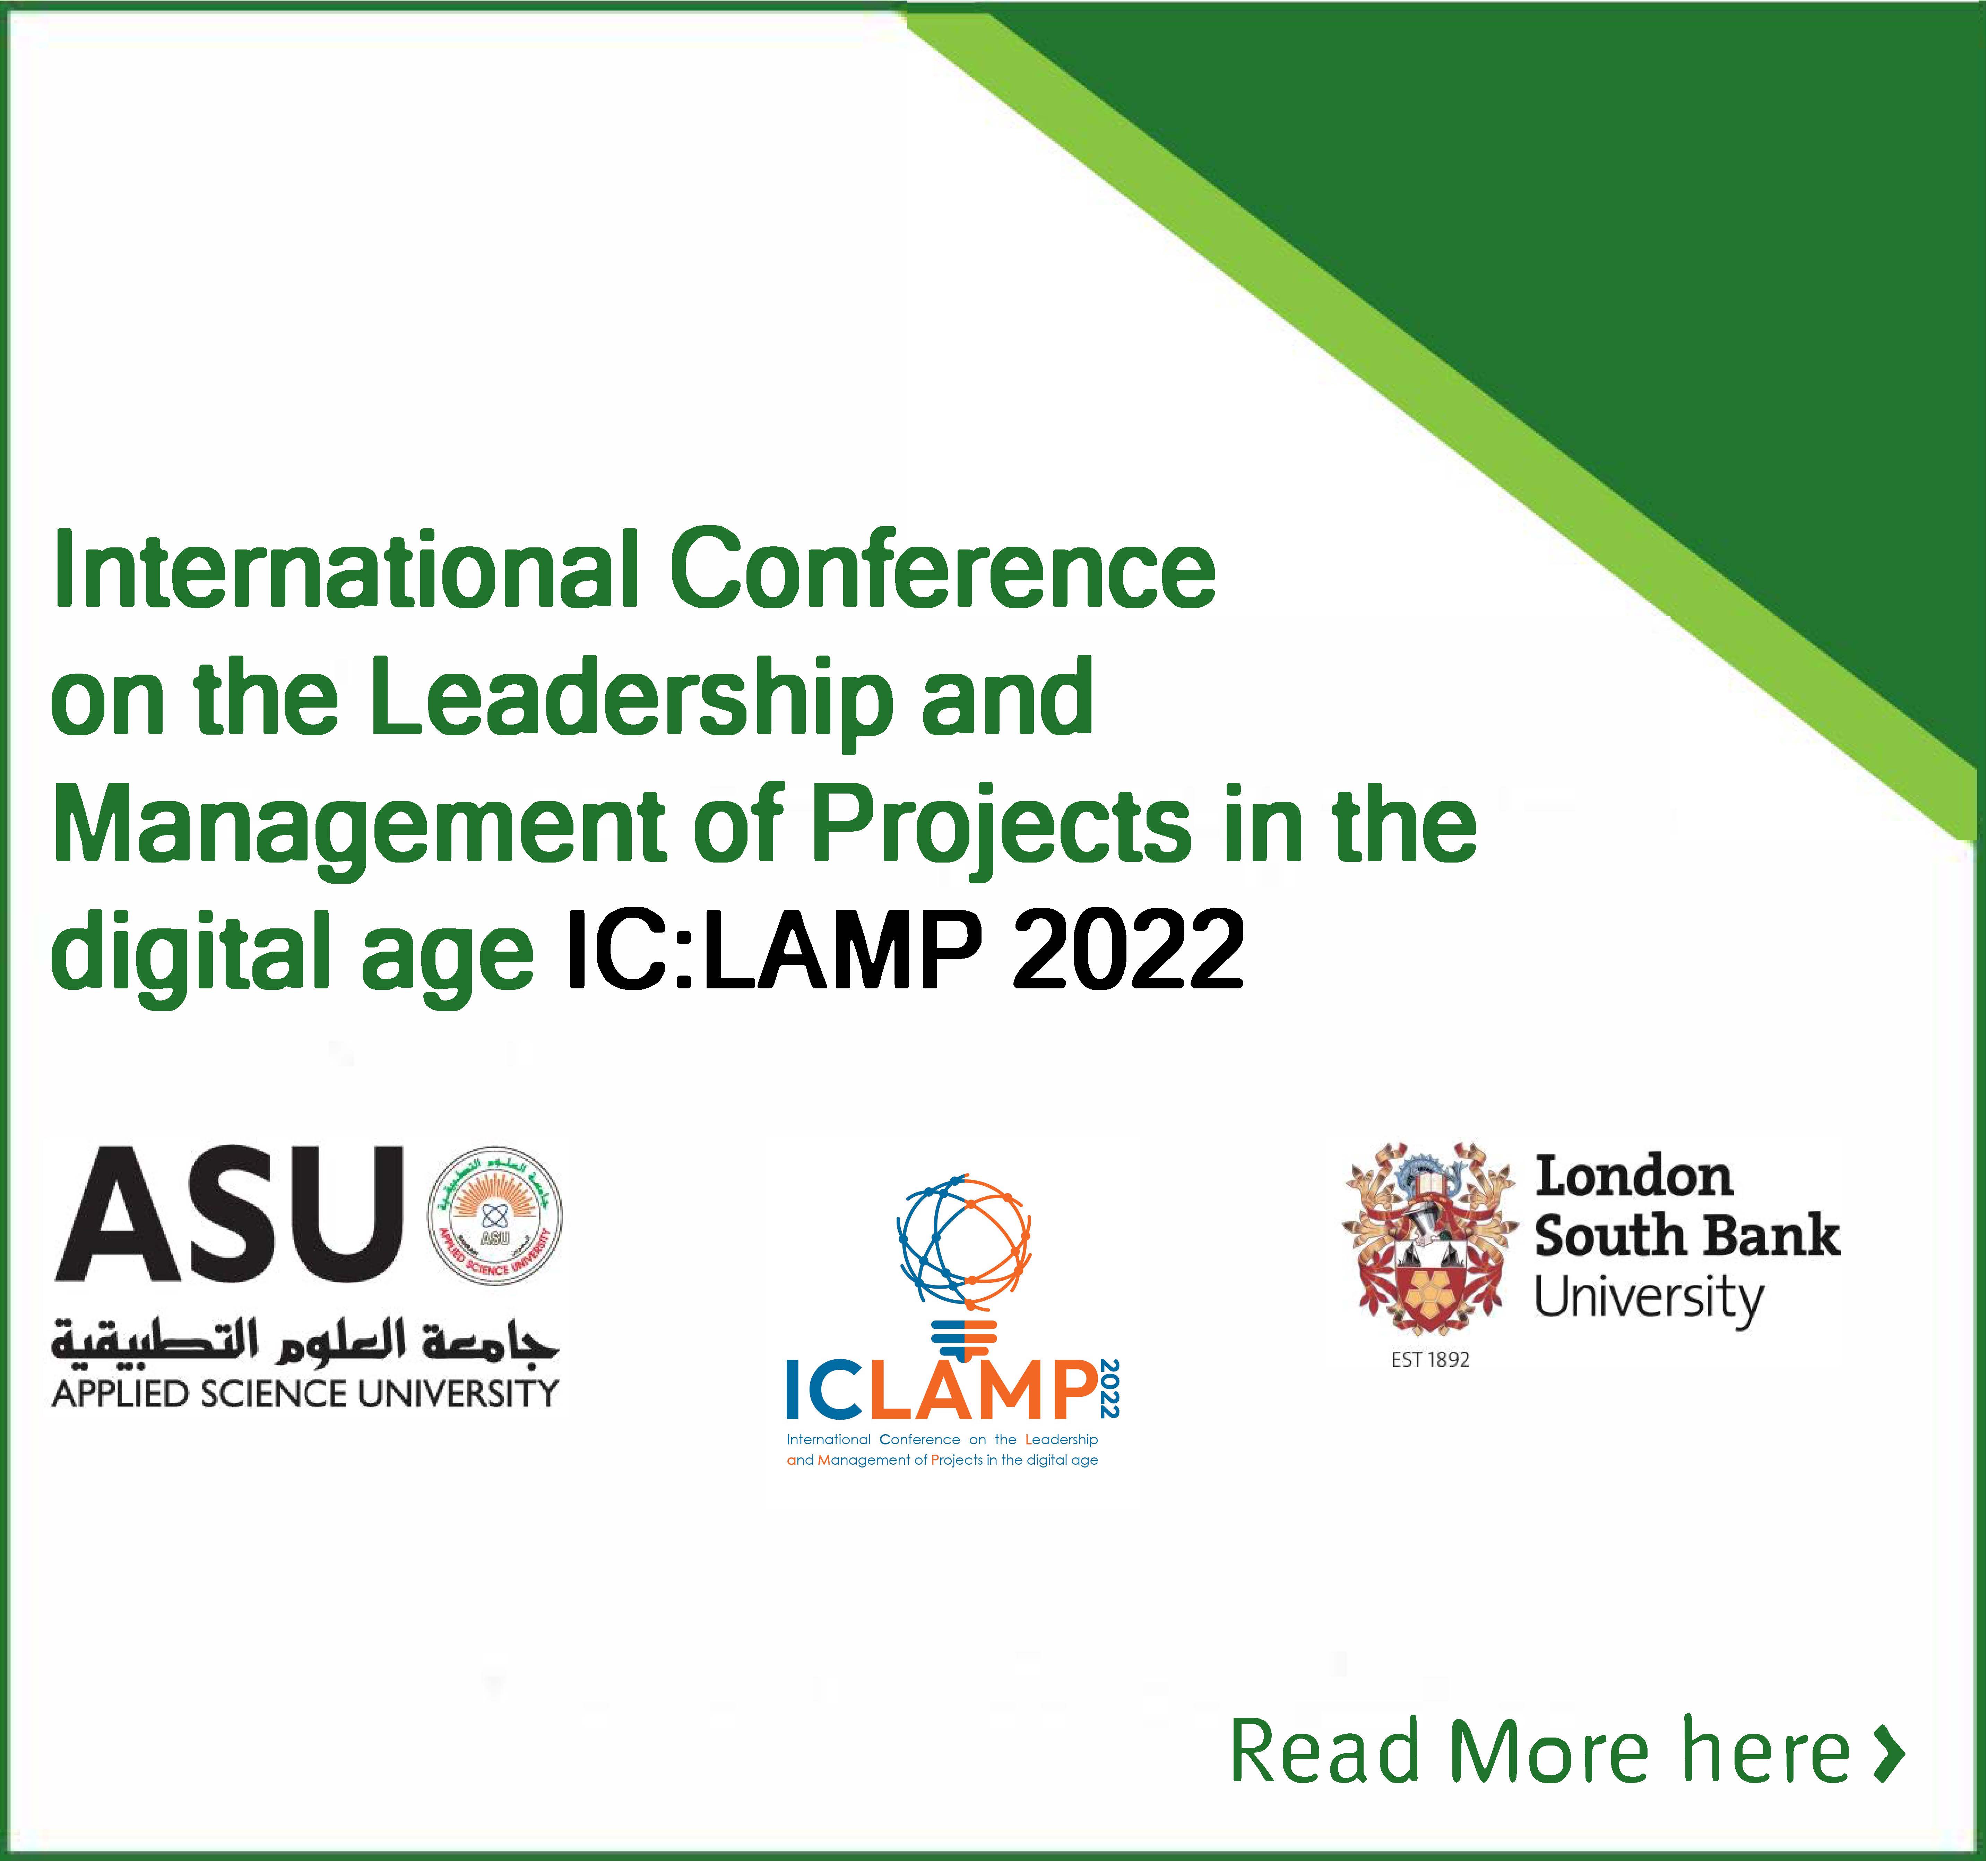 International Conference on the Leadership and Management of Projects in the digital age(IC:LAMP 2022)